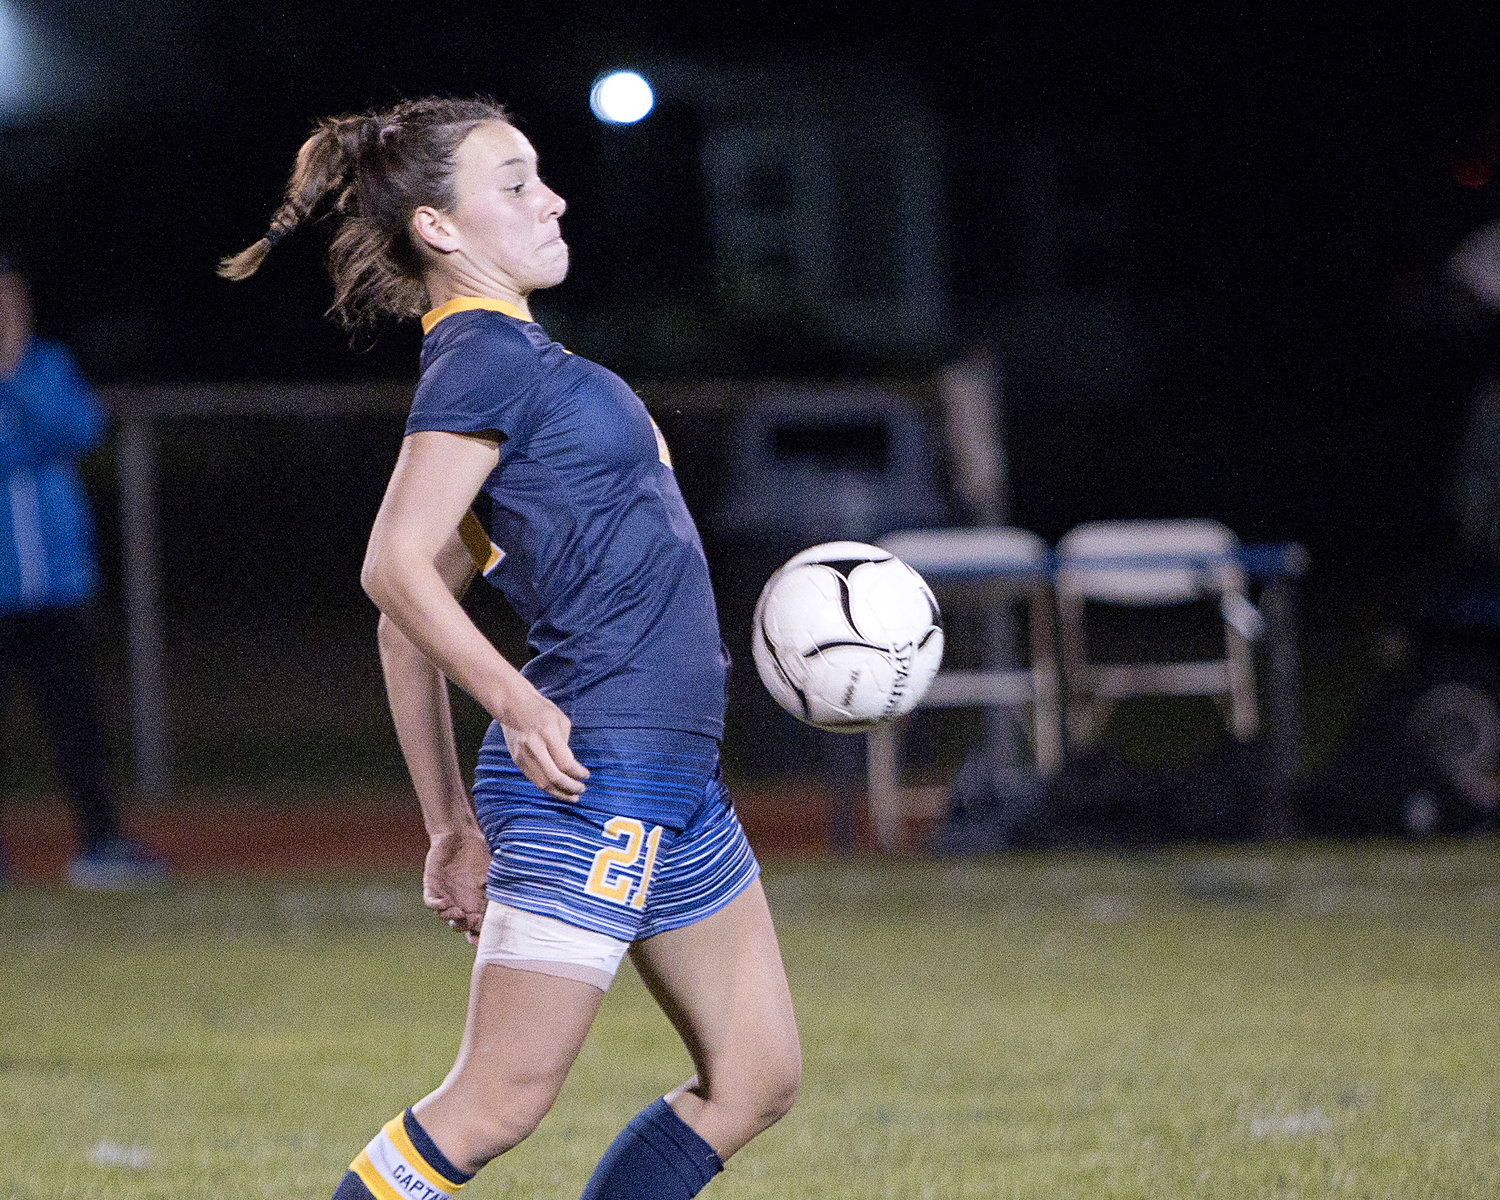 Sarah Yee controls a pass at mid-field while competing against Cumberland, Friday.